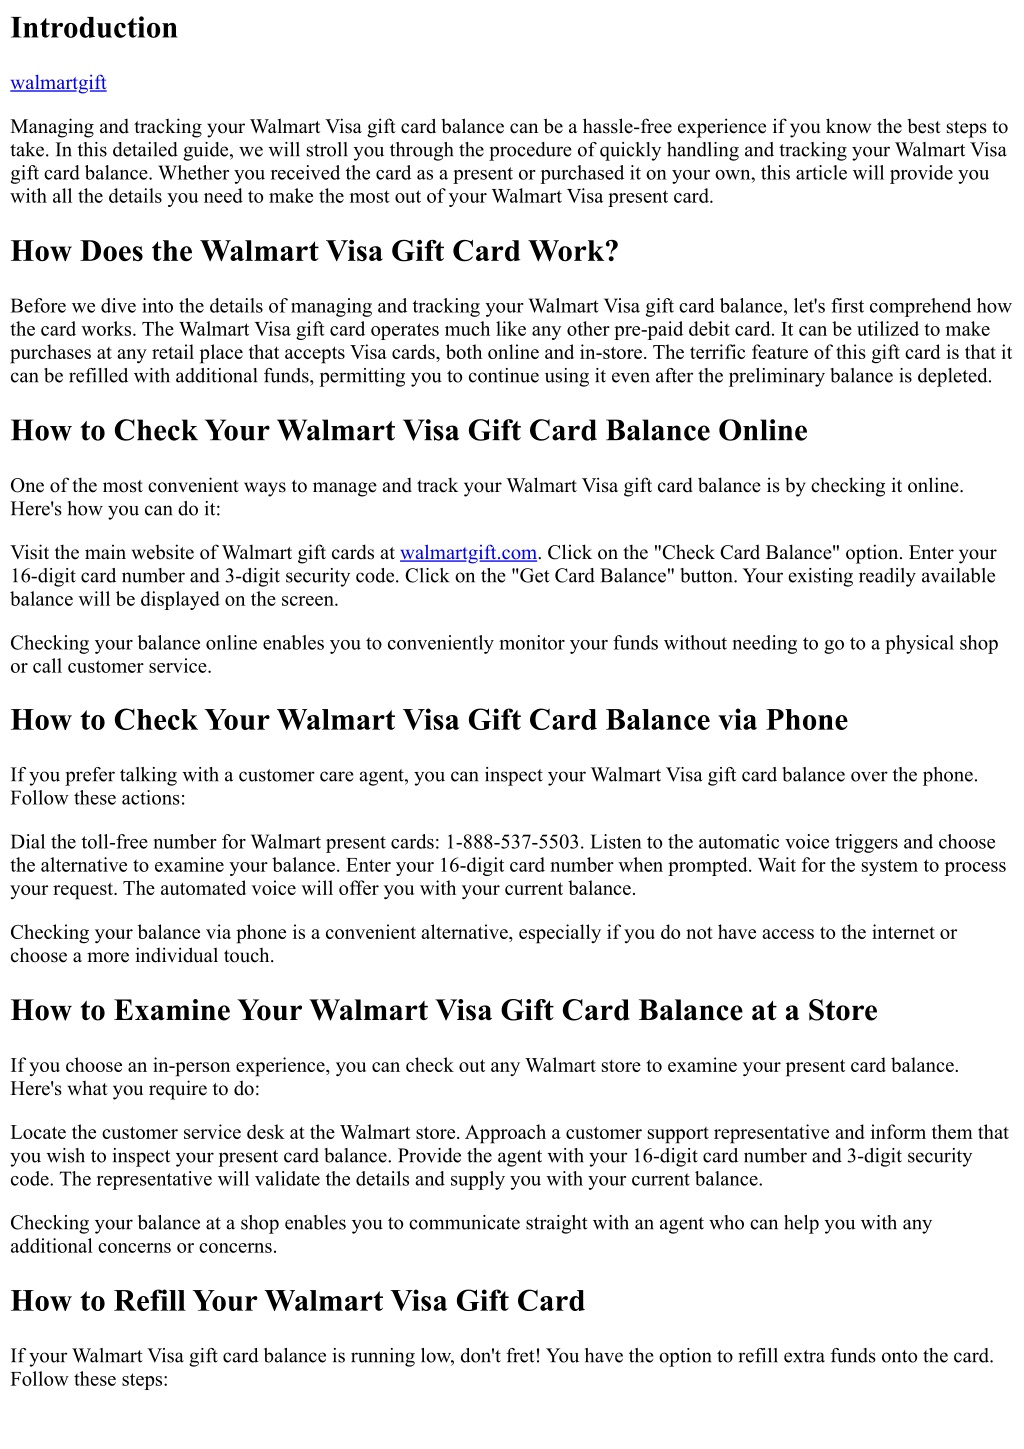 PPT - How to Quickly Handle and Track Your Walmart Visa Gift Card Balance  PowerPoint Presentation - ID:12741783